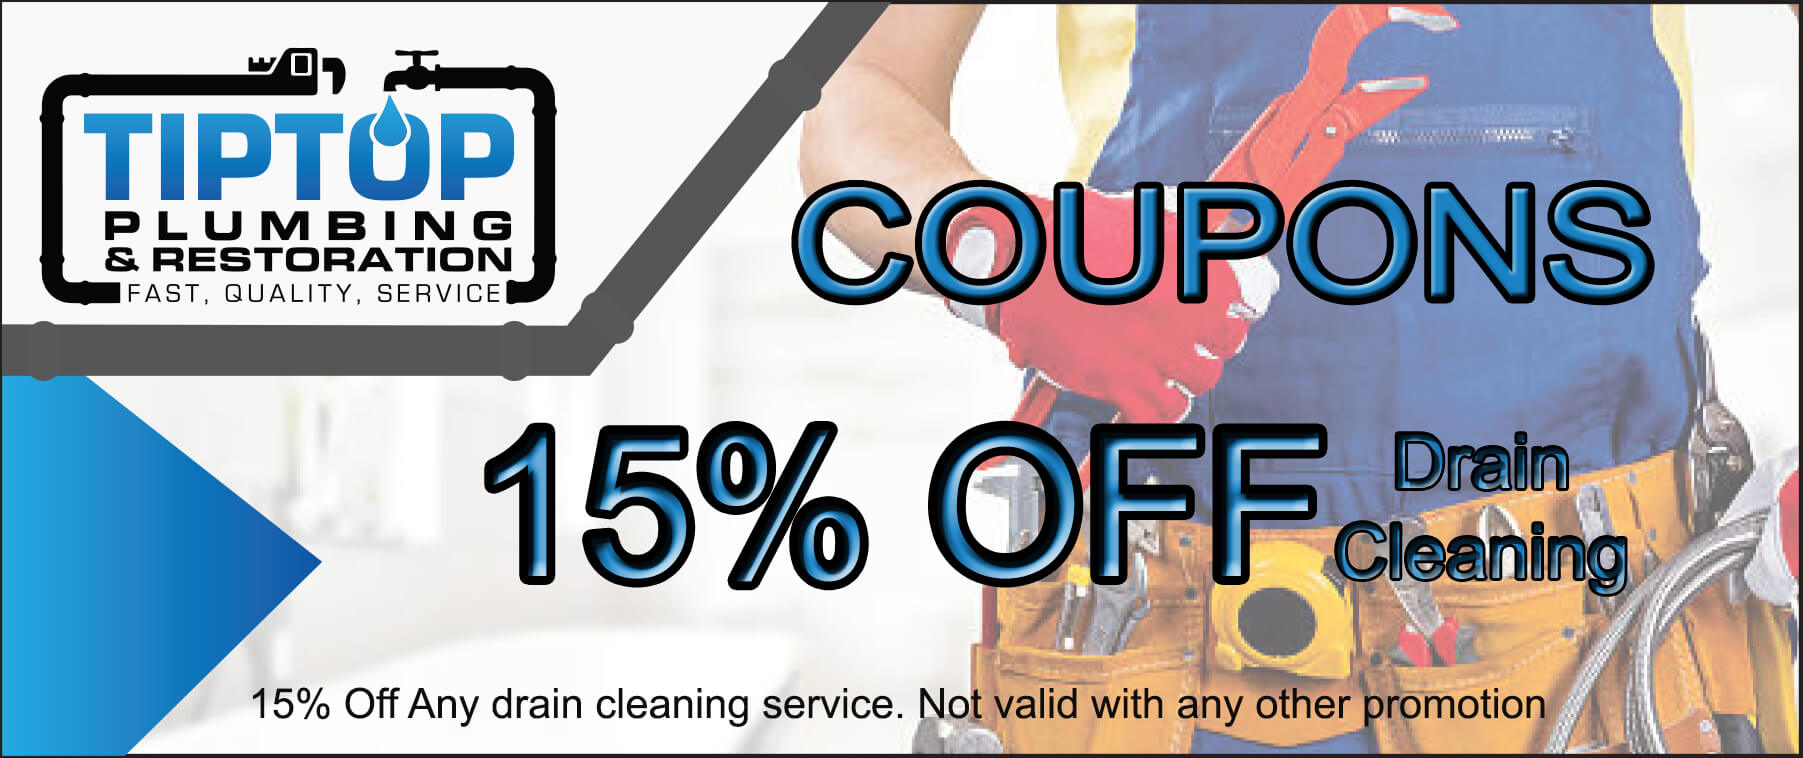 Tip Top Plumbing & Restoration Drain Cleaning Service 15% Off Coupon